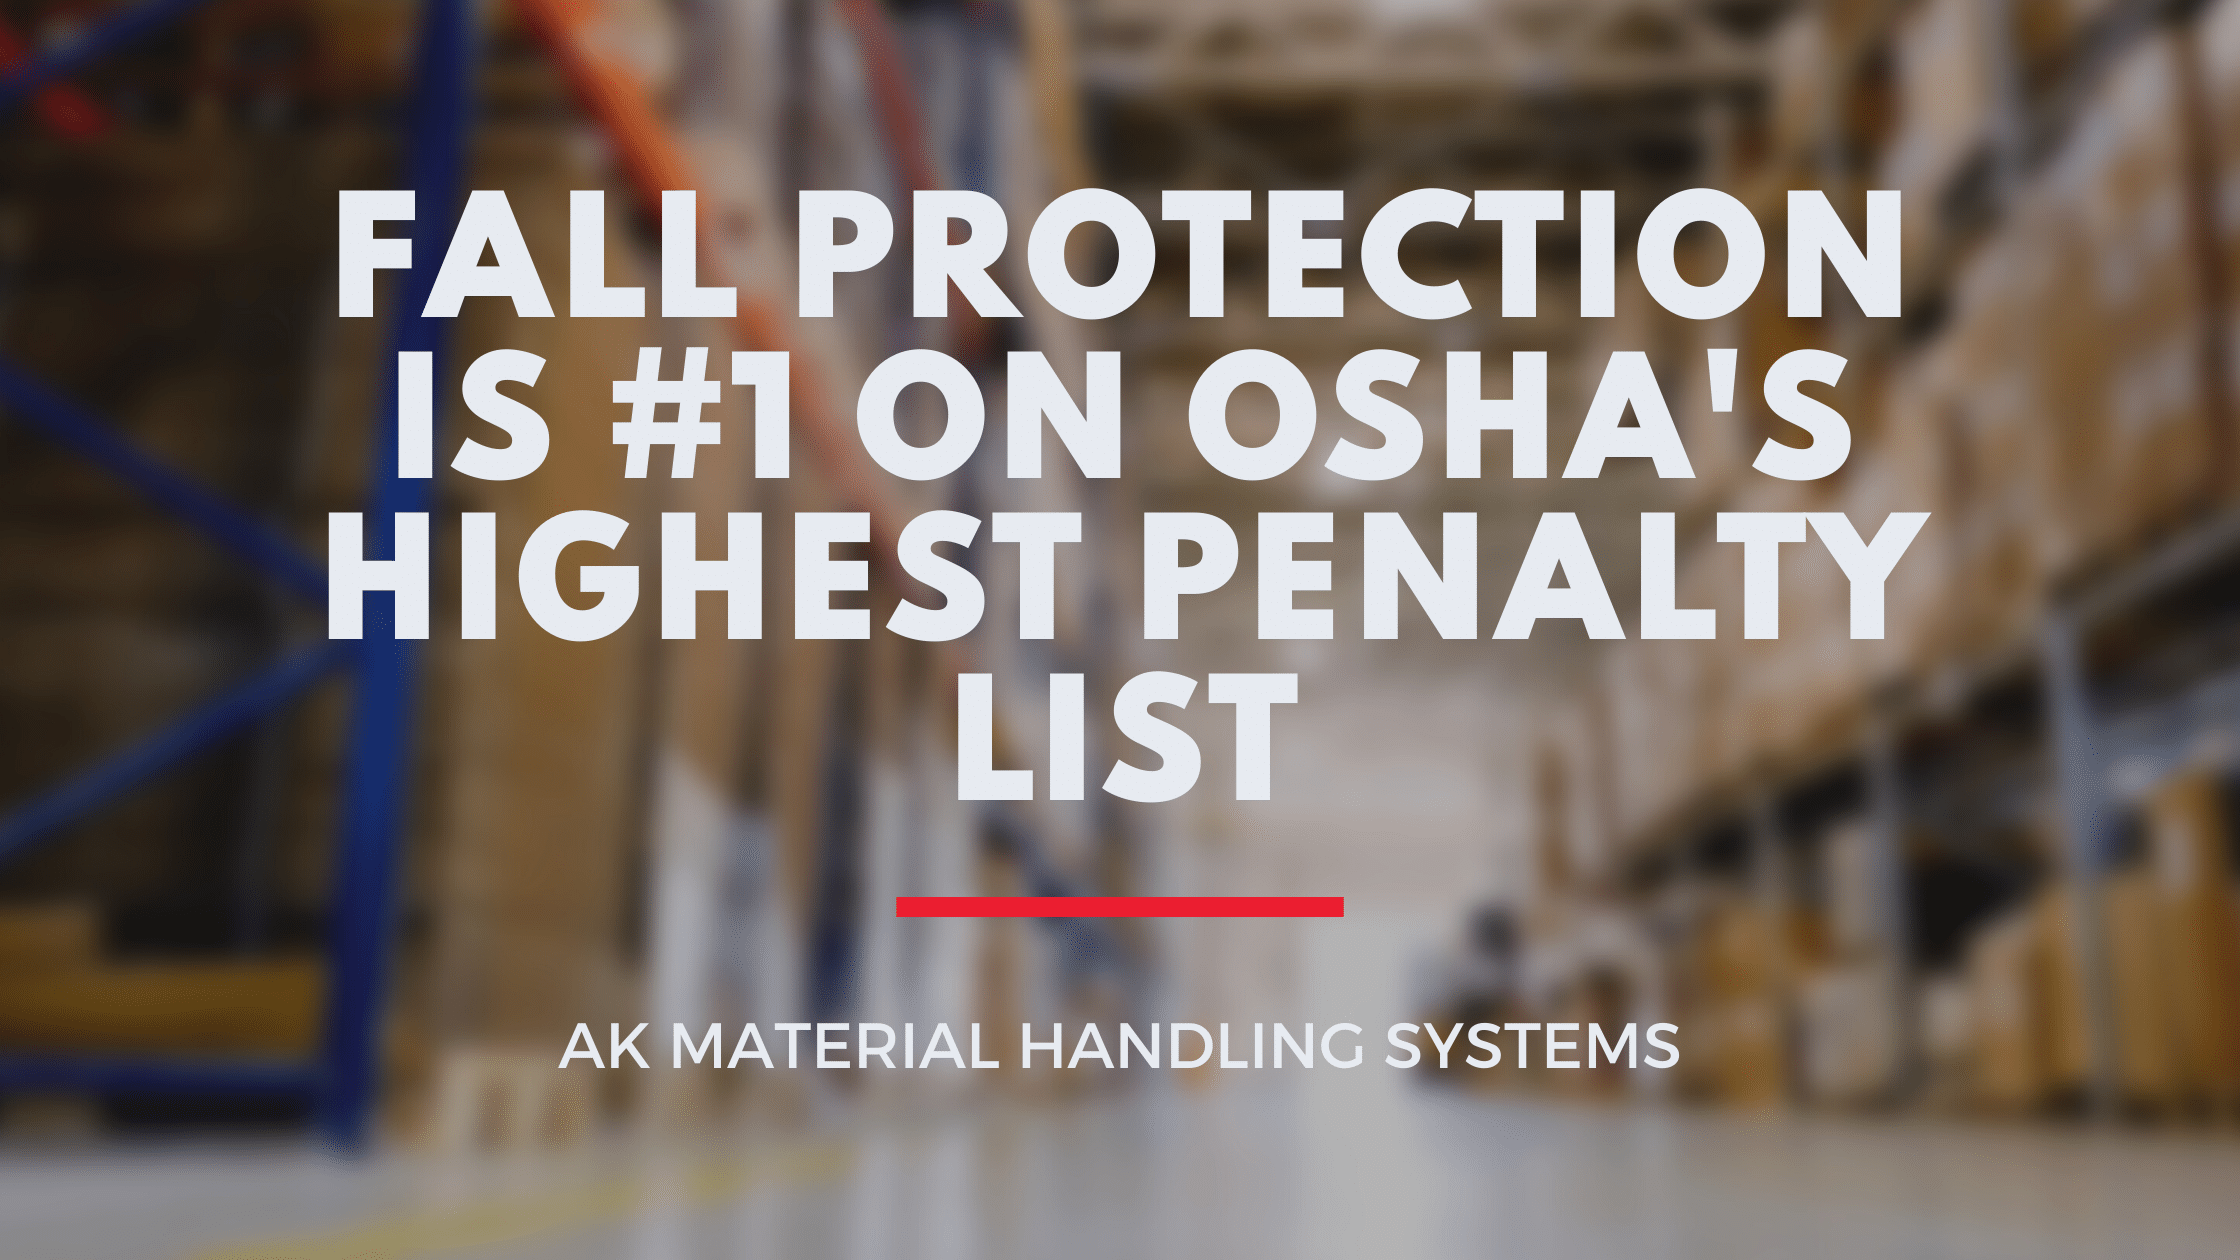 Fall protection is #1 on Osha's highest penalty list.